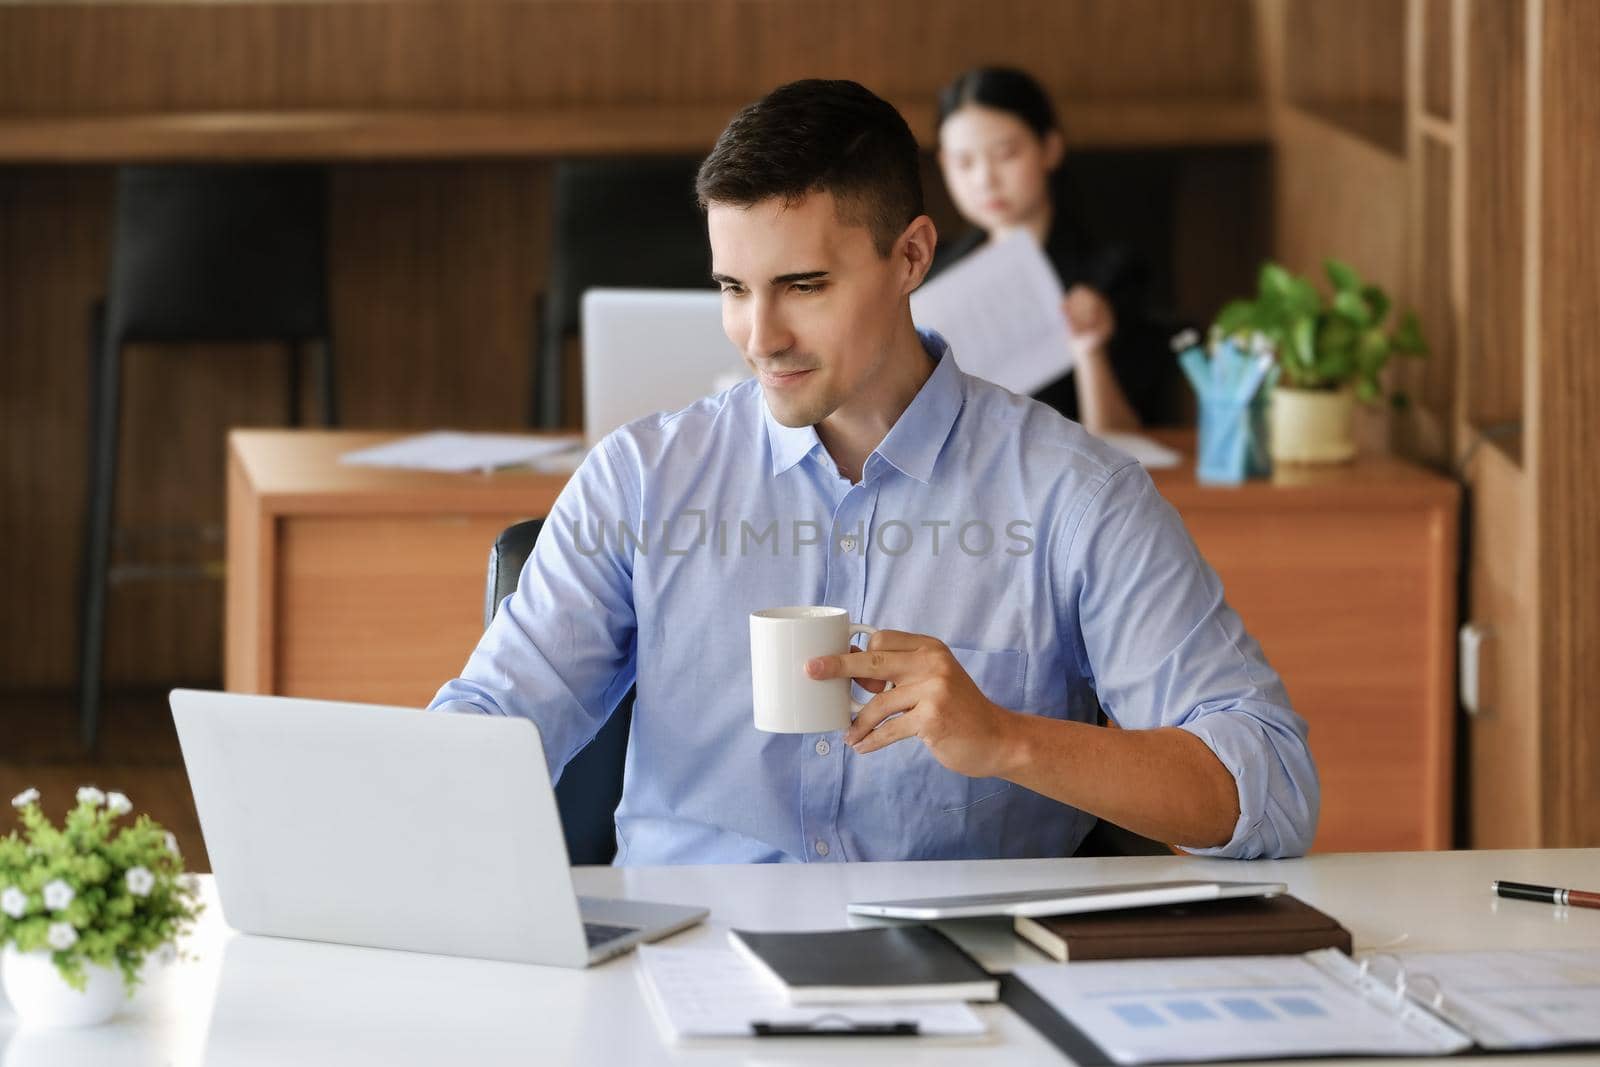 Male marketing managers drink coffee while working to reduce drowsiness before using computers, iPads, and marketing analysis papers. by Manastrong